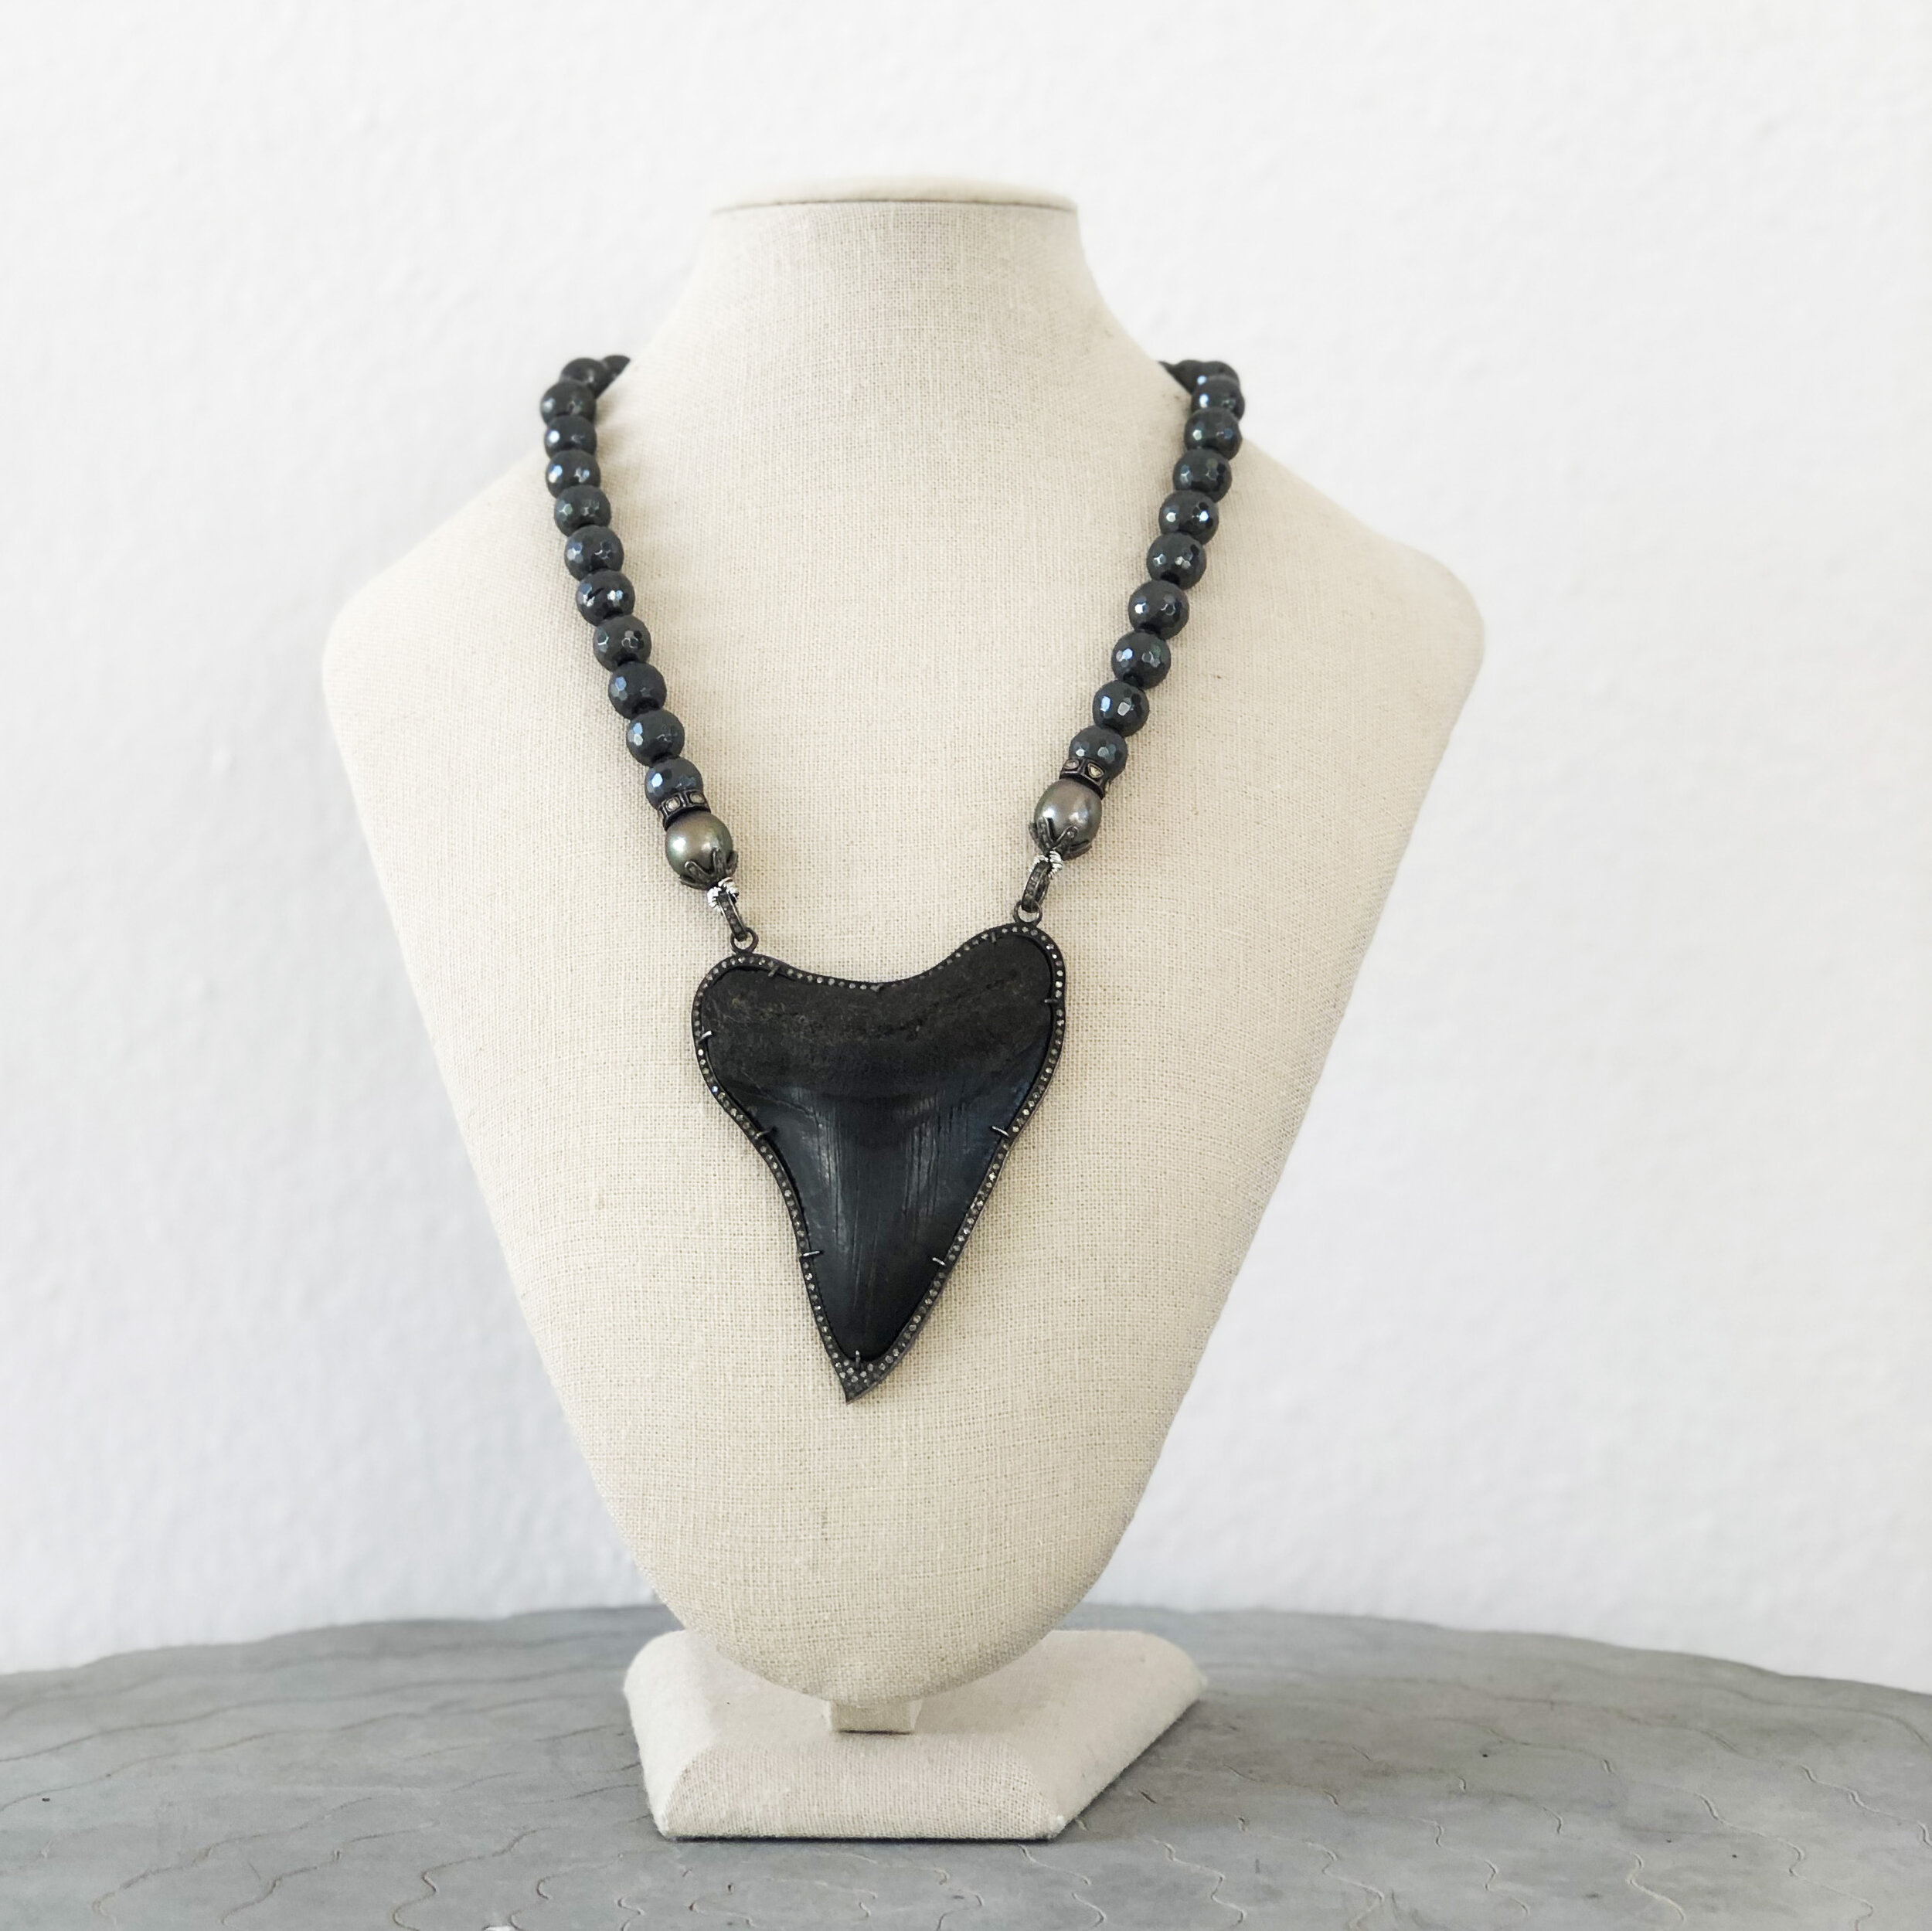 Pin on Shark Tooth Necklaces, Bracelets & earrings